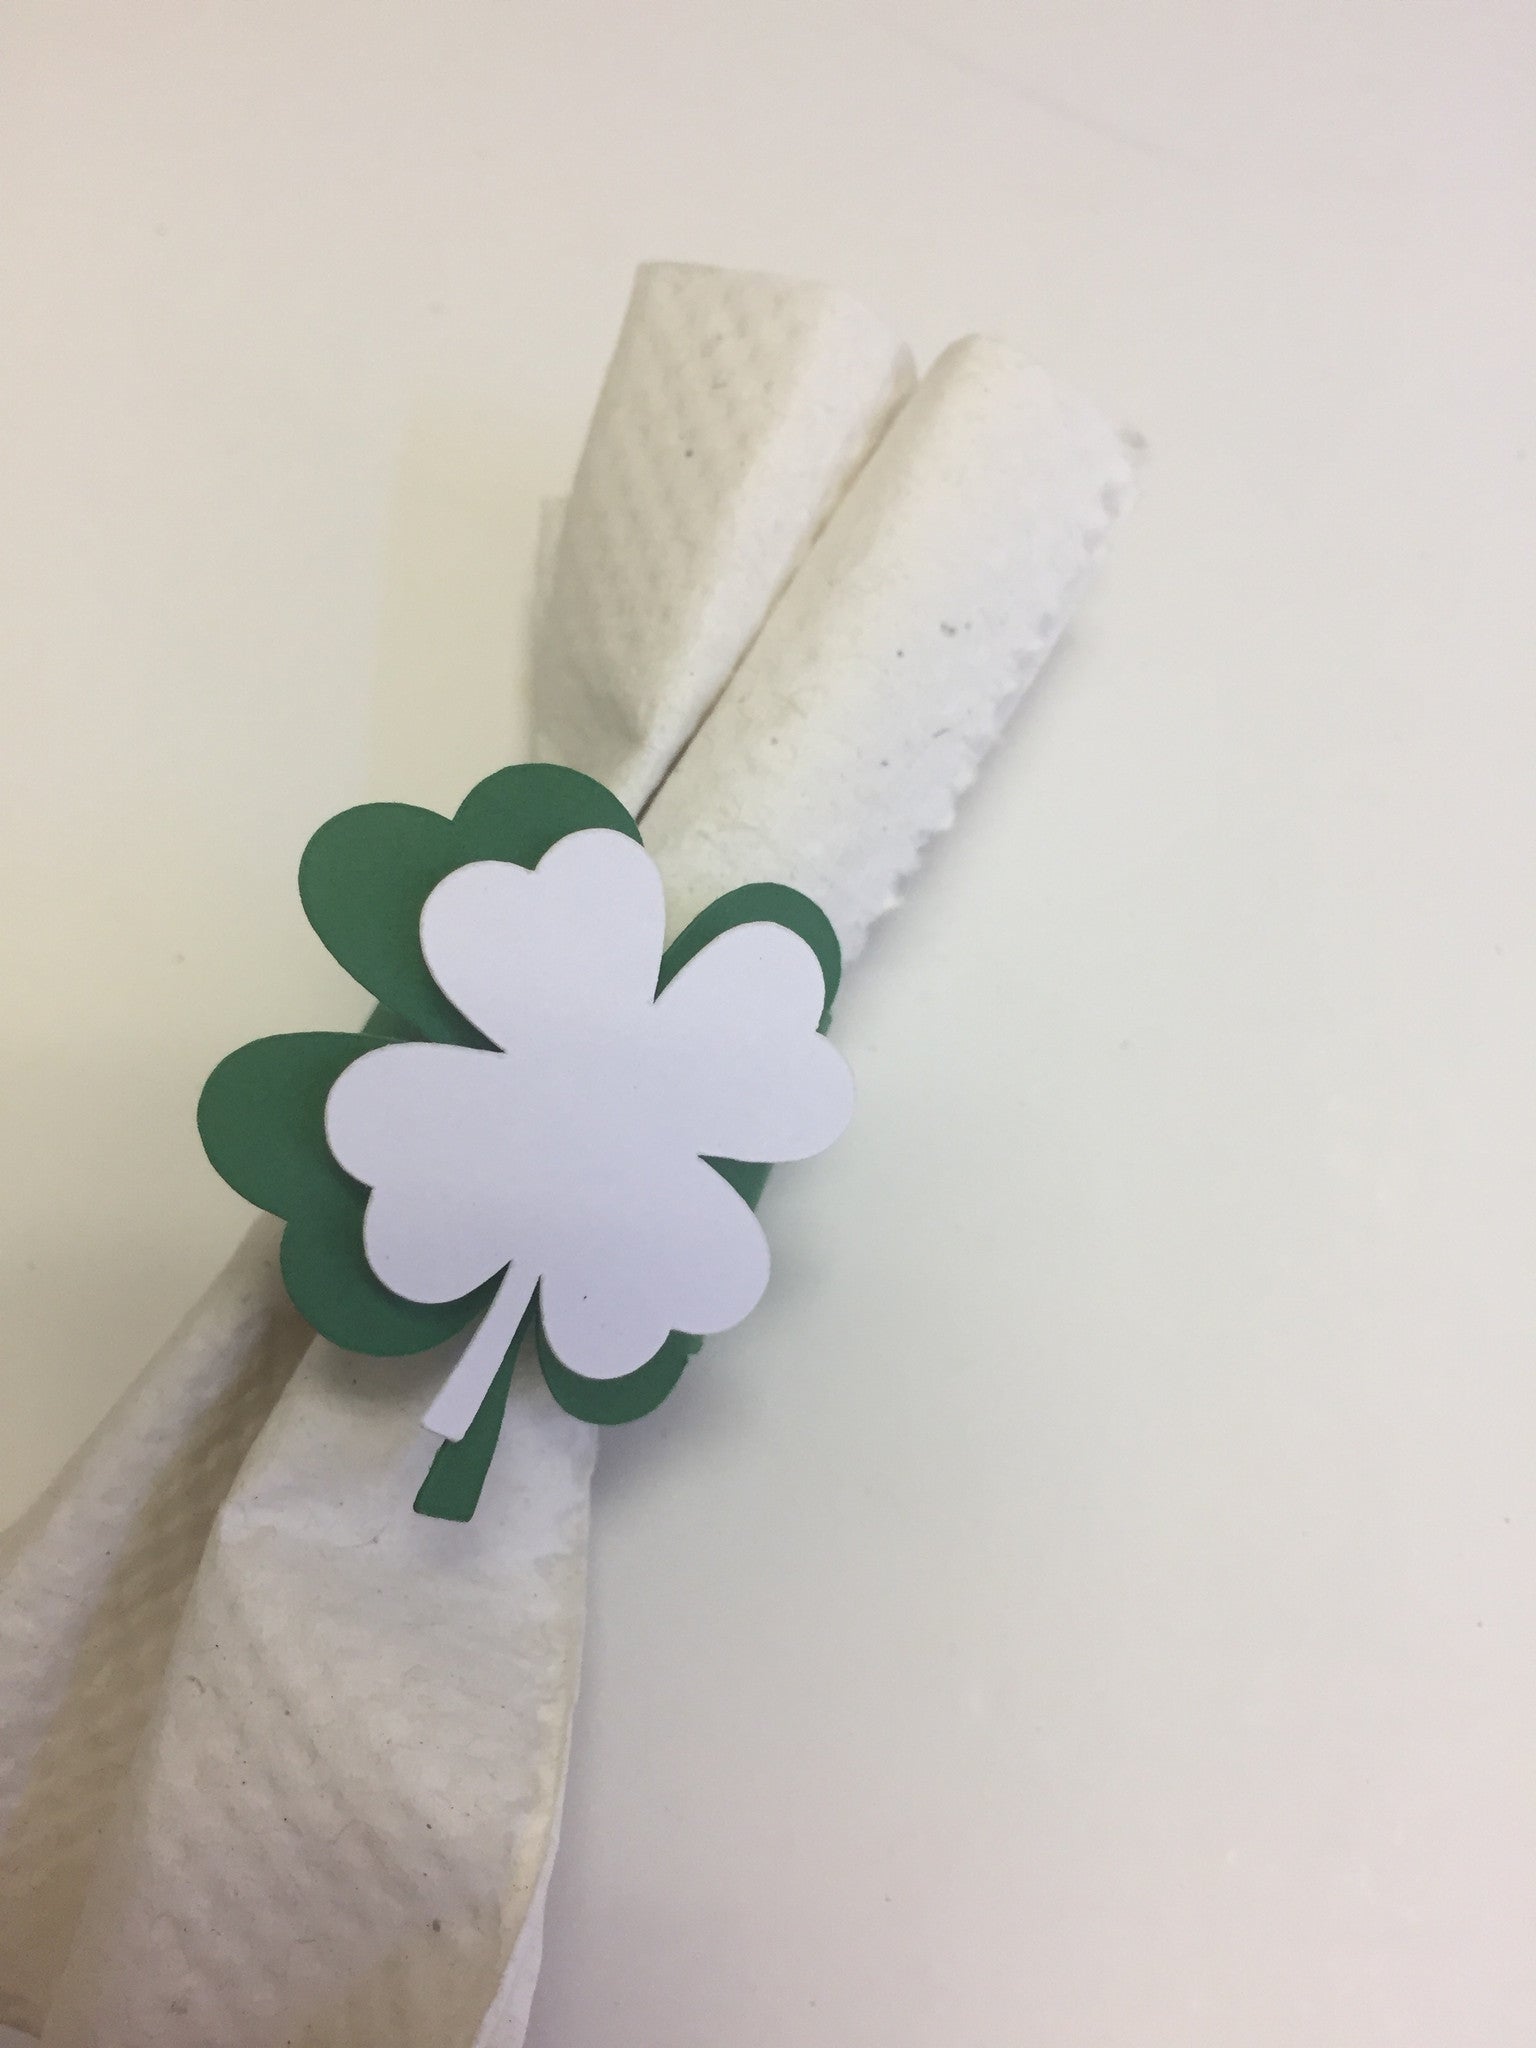 Green Clover with a white clover on top of a wrap around napkin ring.